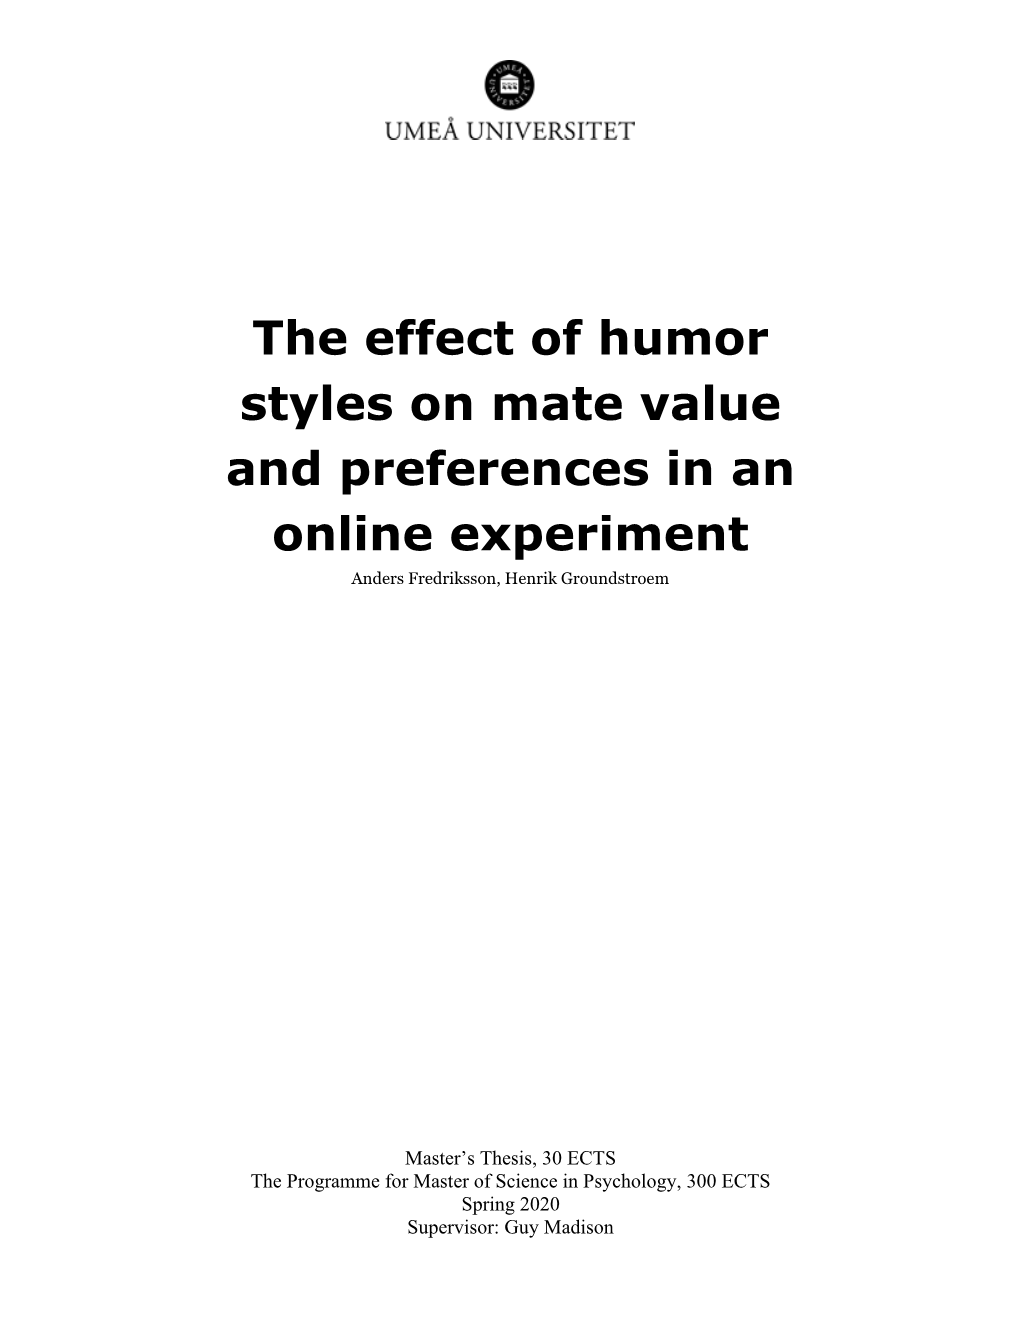 The Effect of Humor Styles on Mate Value and Preferences in an Online Experiment